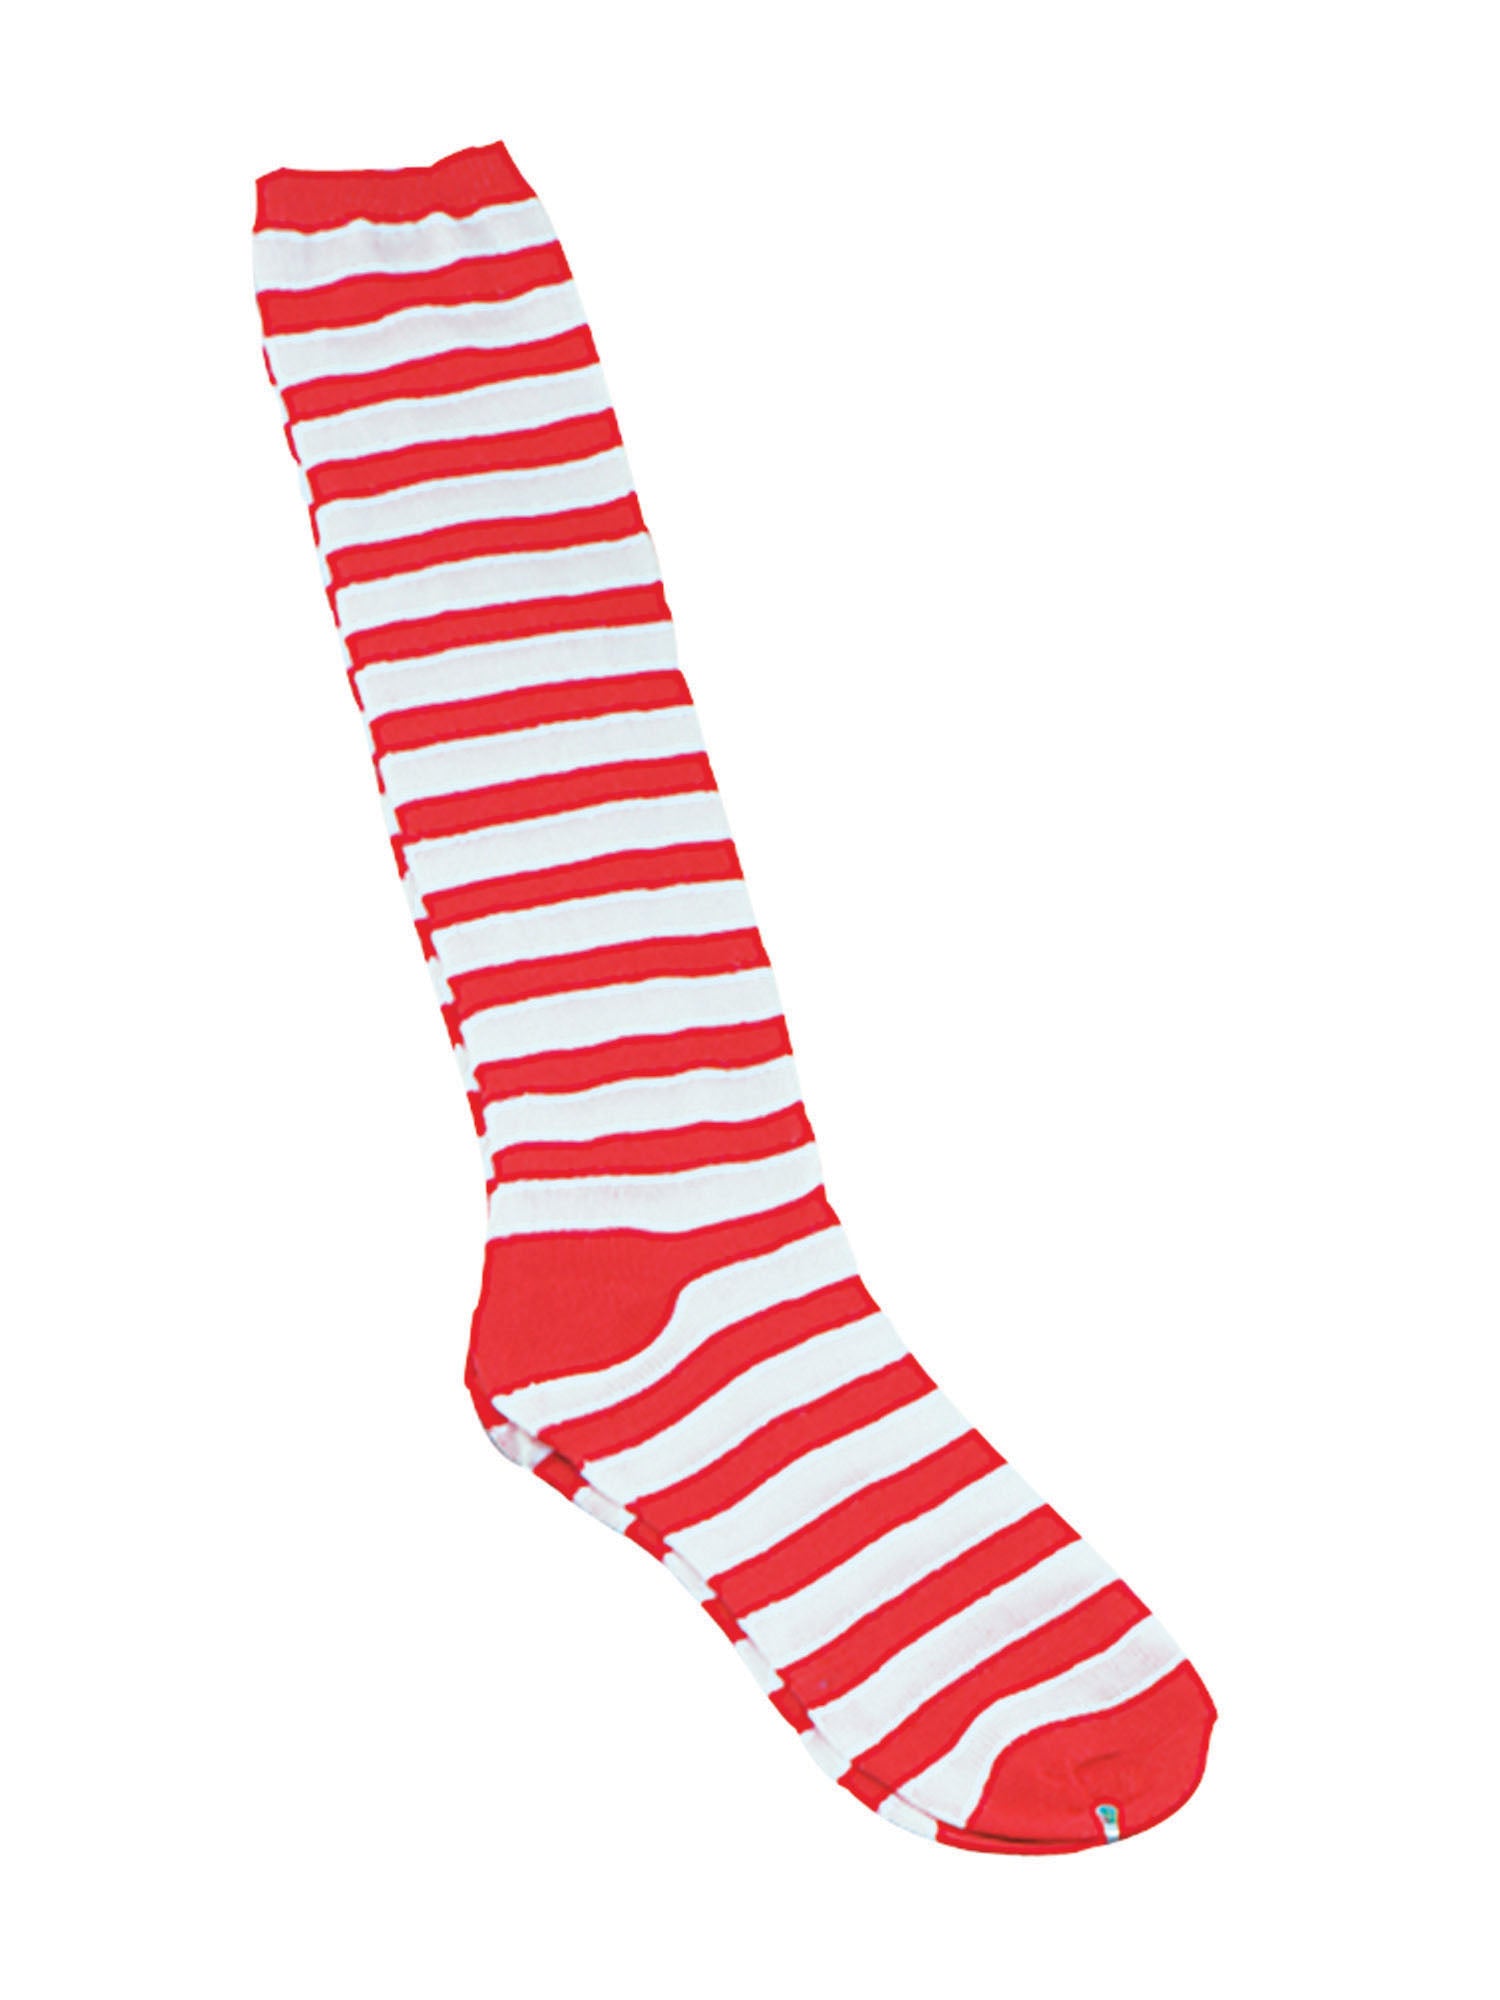 Clown, multi-colored, Generic, Socks, One Size, Front